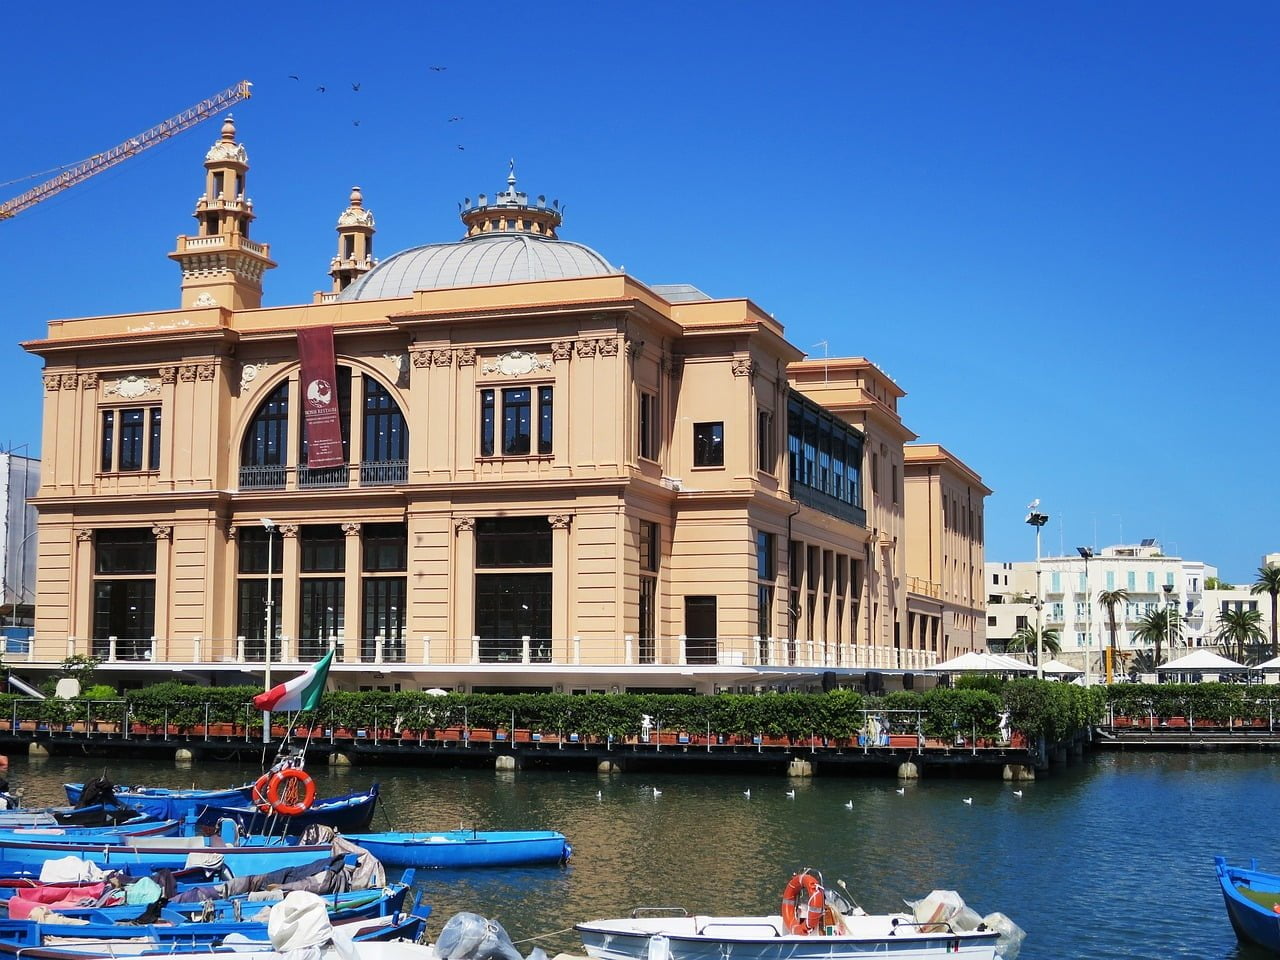 Bari Travel Guide with Things to Do, See and Eat in Bari, Italy